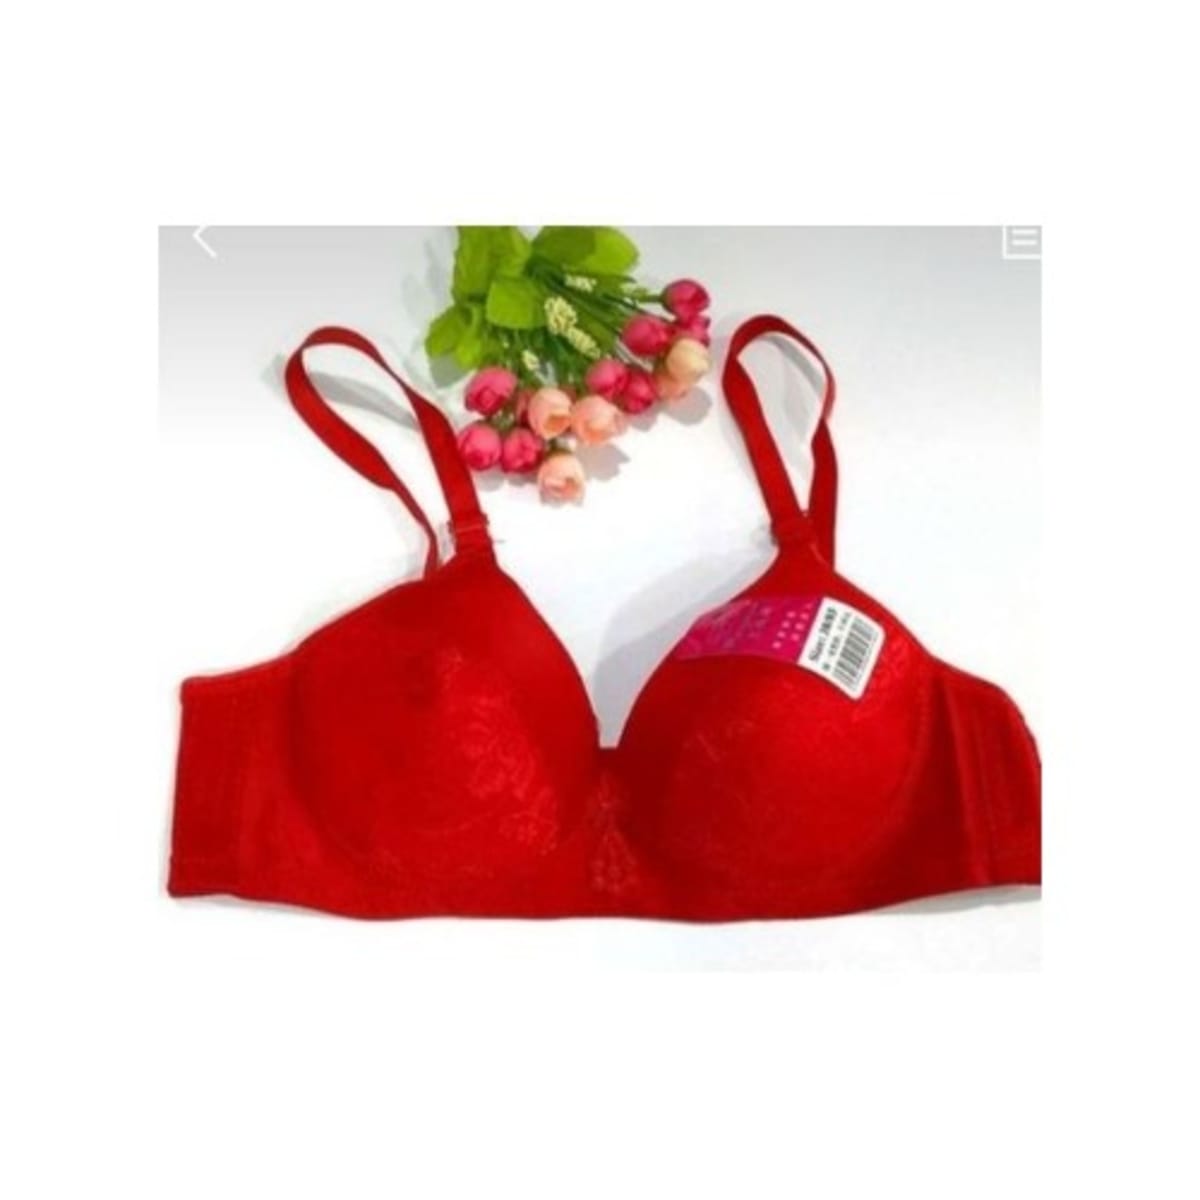 NEW ladies sexy..lot of 3 bras asst colorspush- up  love